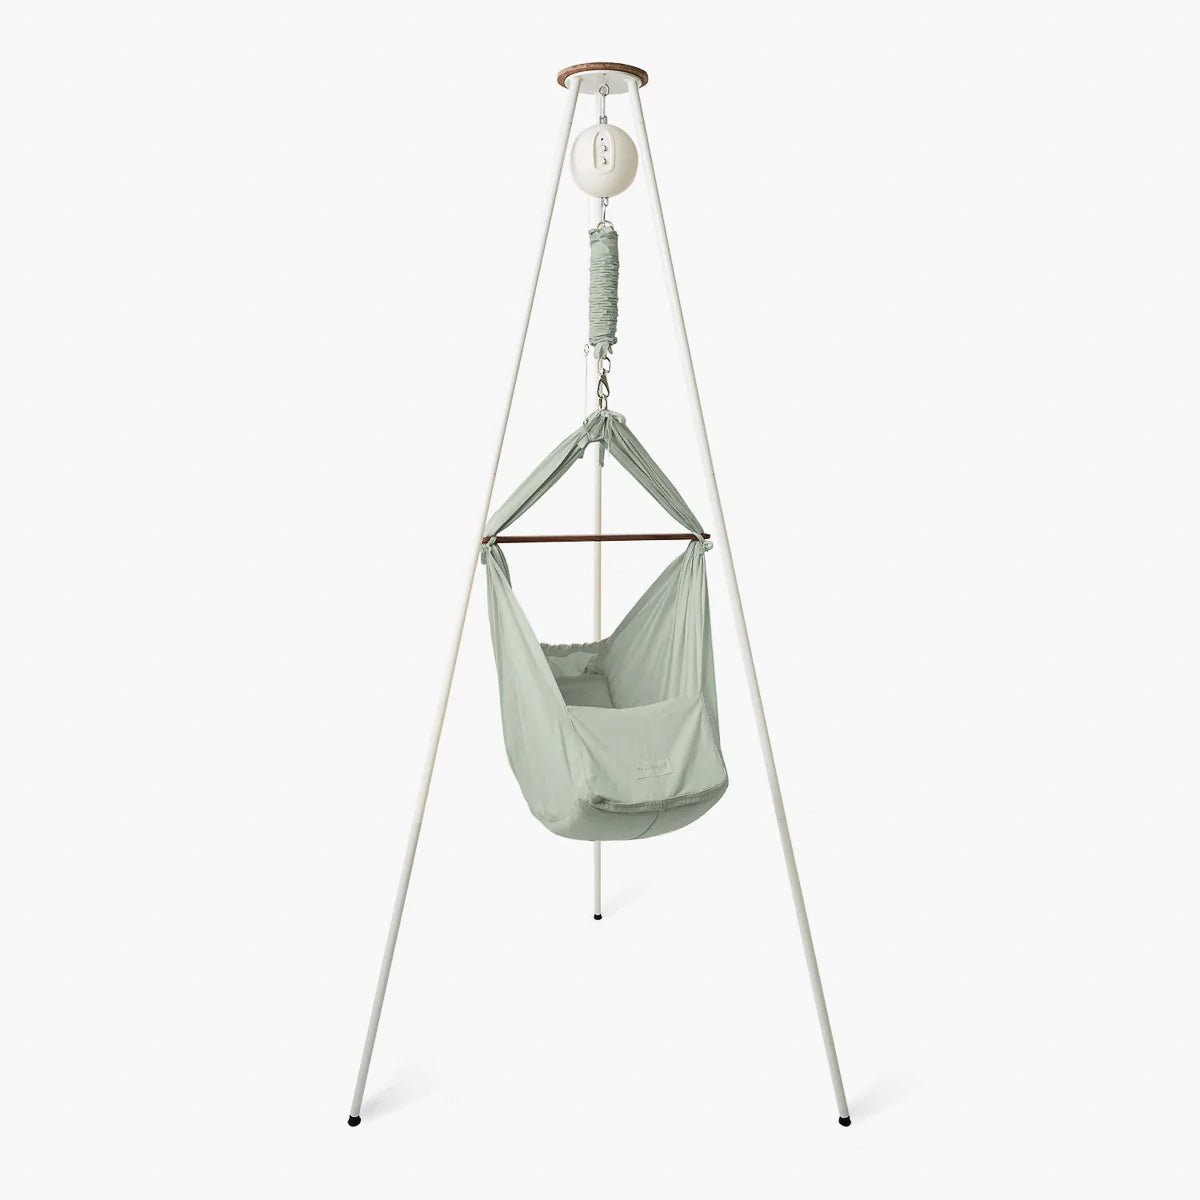 Moonboon Bundle - Baby Hammock, Motor and Tripod Stand Seagrass / White Tripod - Hola BB